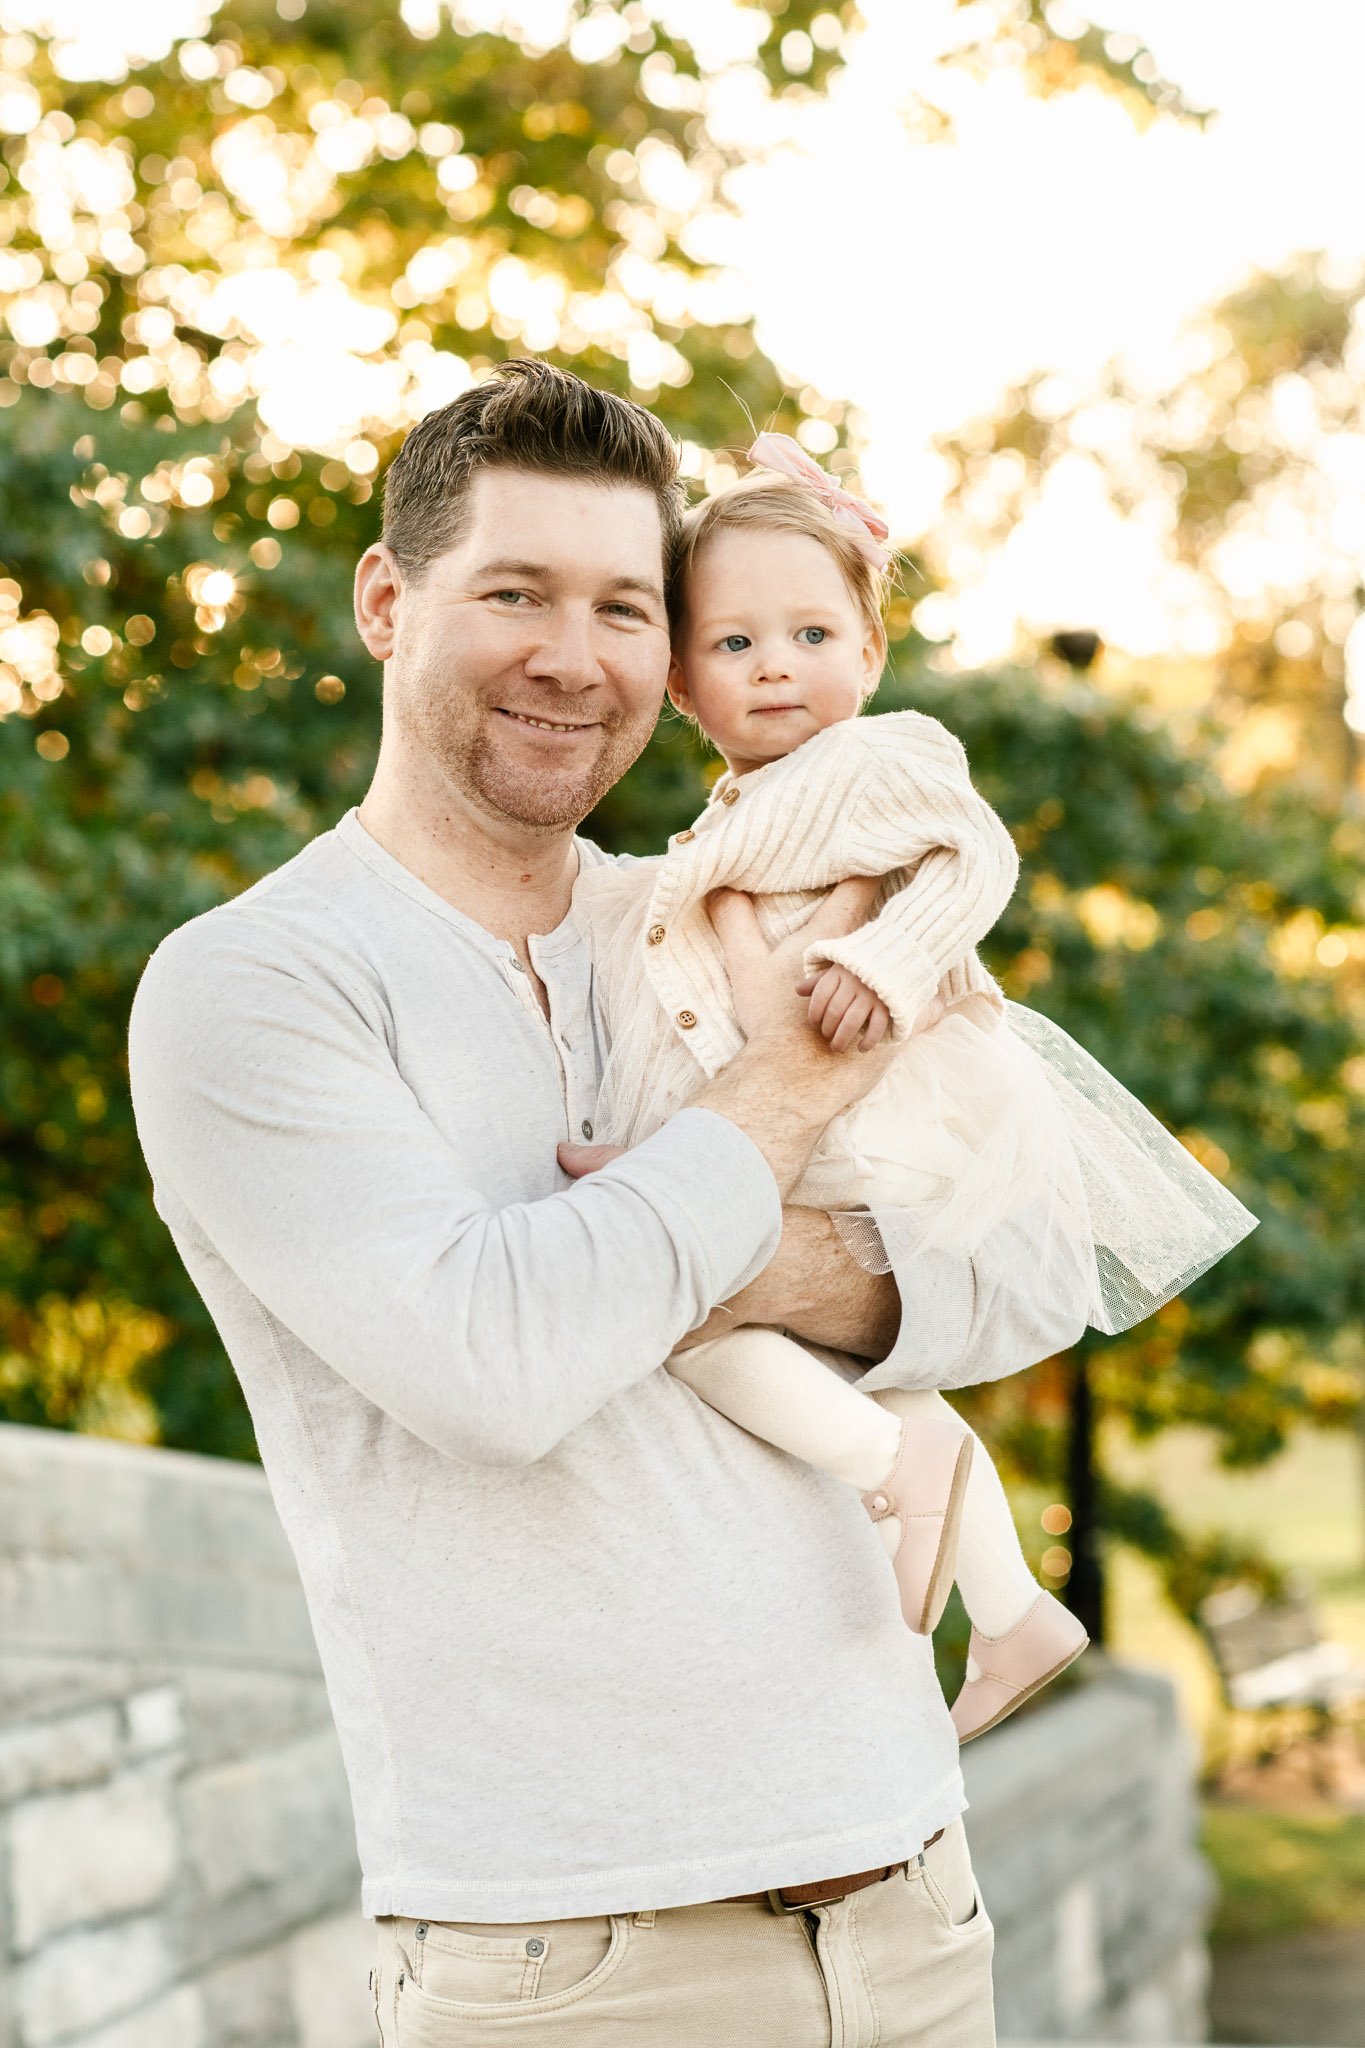  A father holds his baby girl in his arms and smiles with the fall leaves in the background by Nicole Hawkins Photography. daddy daughter little girl outfits idea for fall pics #NicoleHawkinsPhotography #NicoleHawkinsFamilies #FallFamilyPhotos #FallP